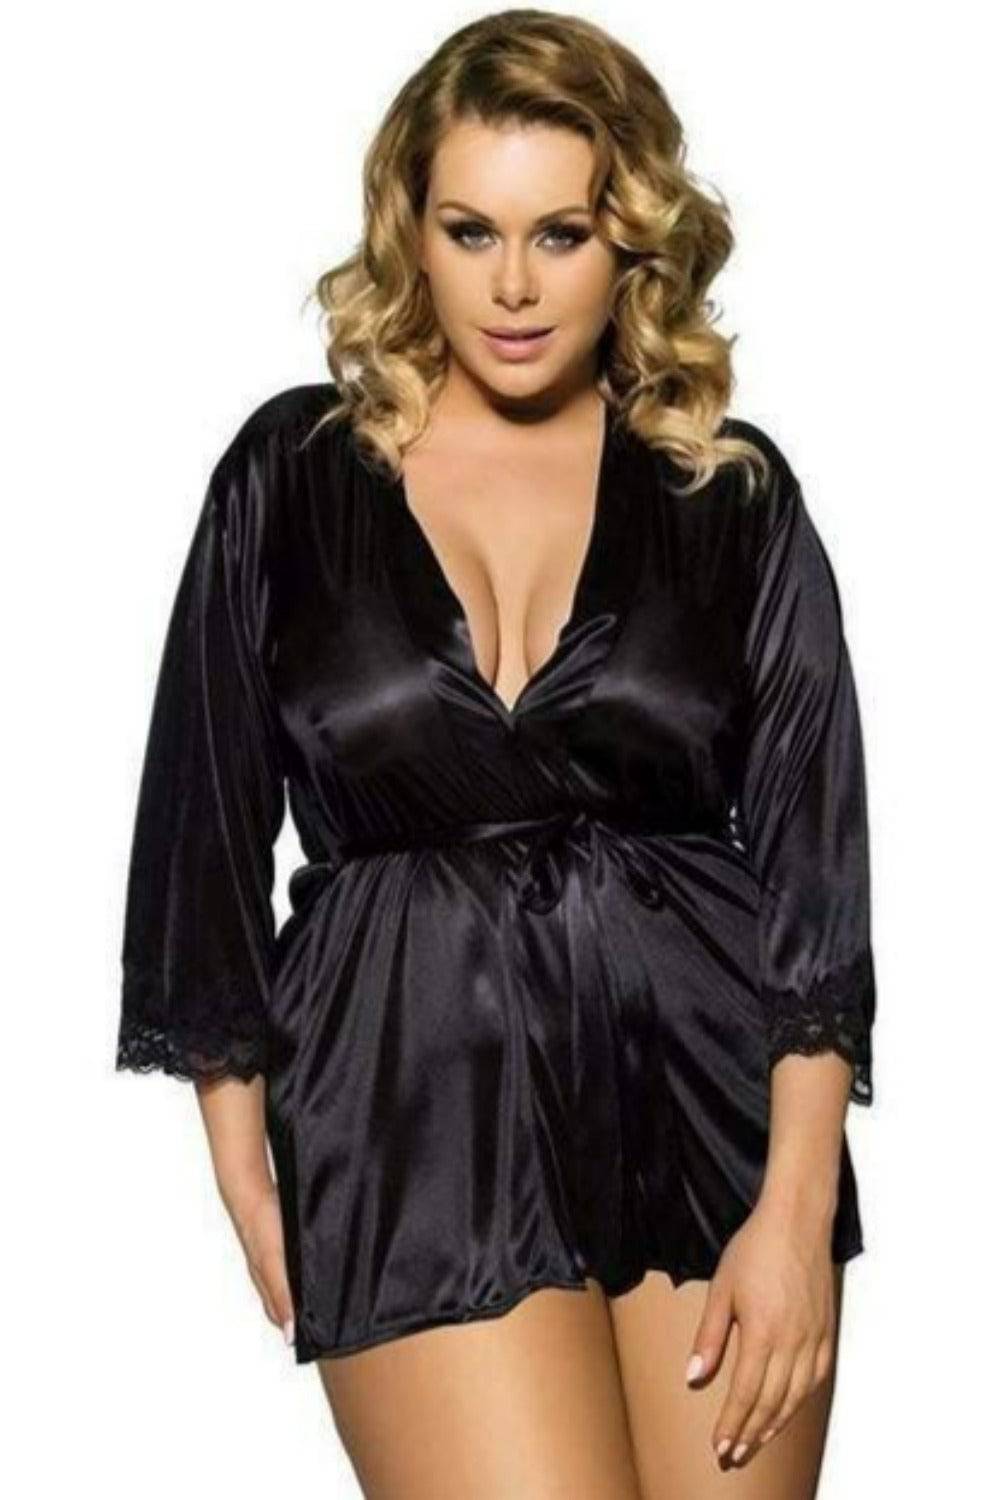 Caress Plus Size Lingerie Chemise in Wine